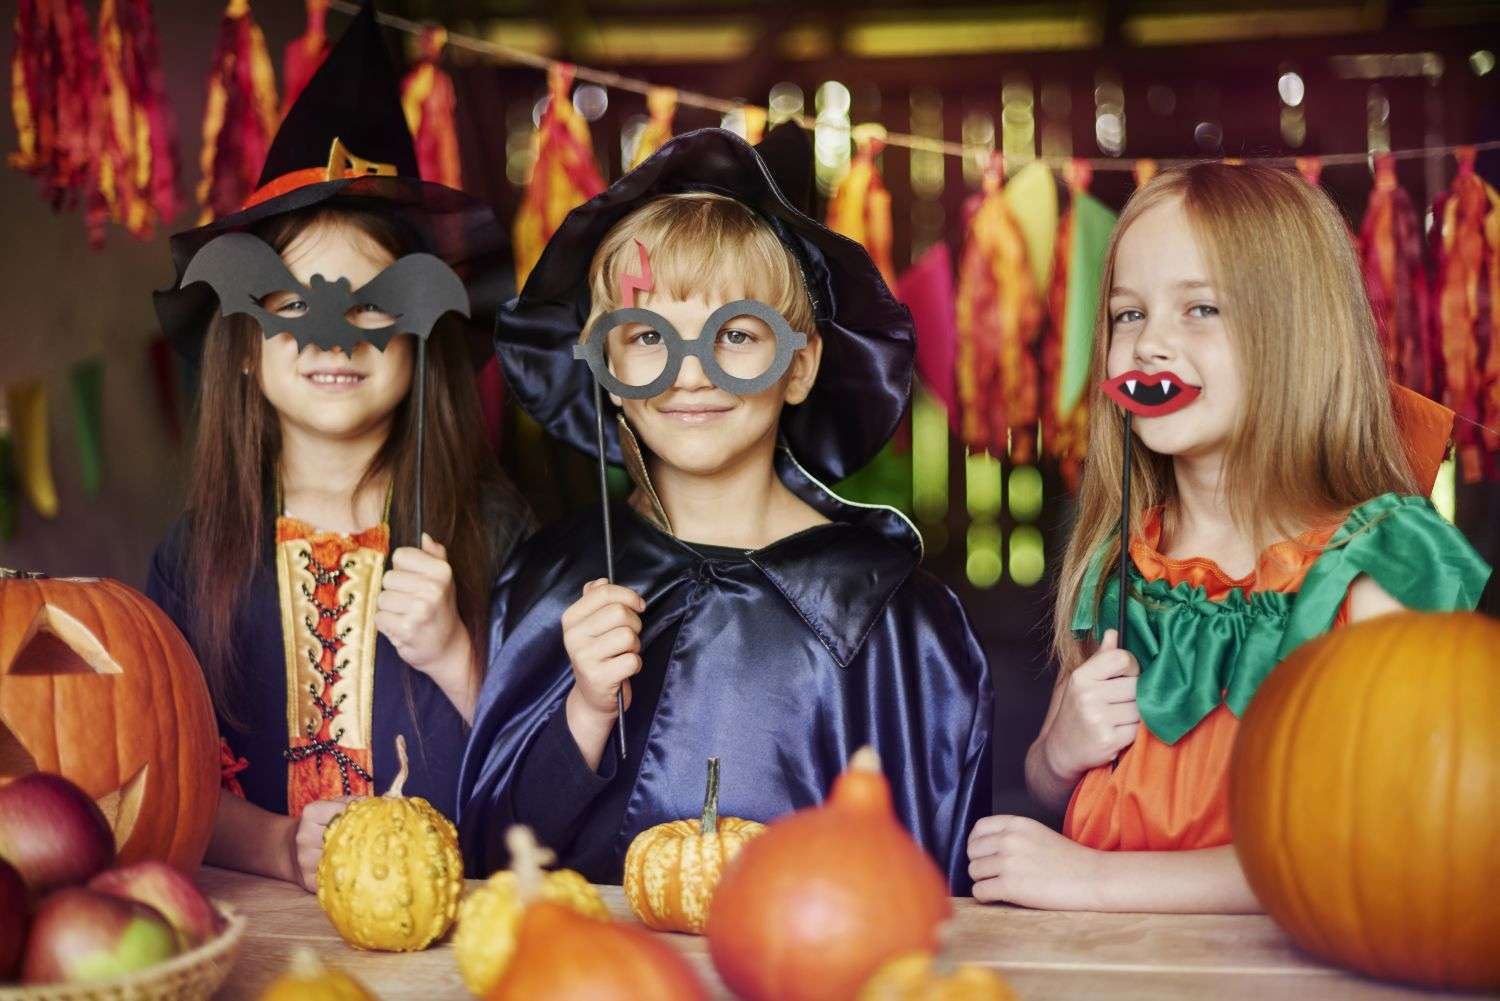 Halloween Party Games for Kids dressing up is childrens favorite game